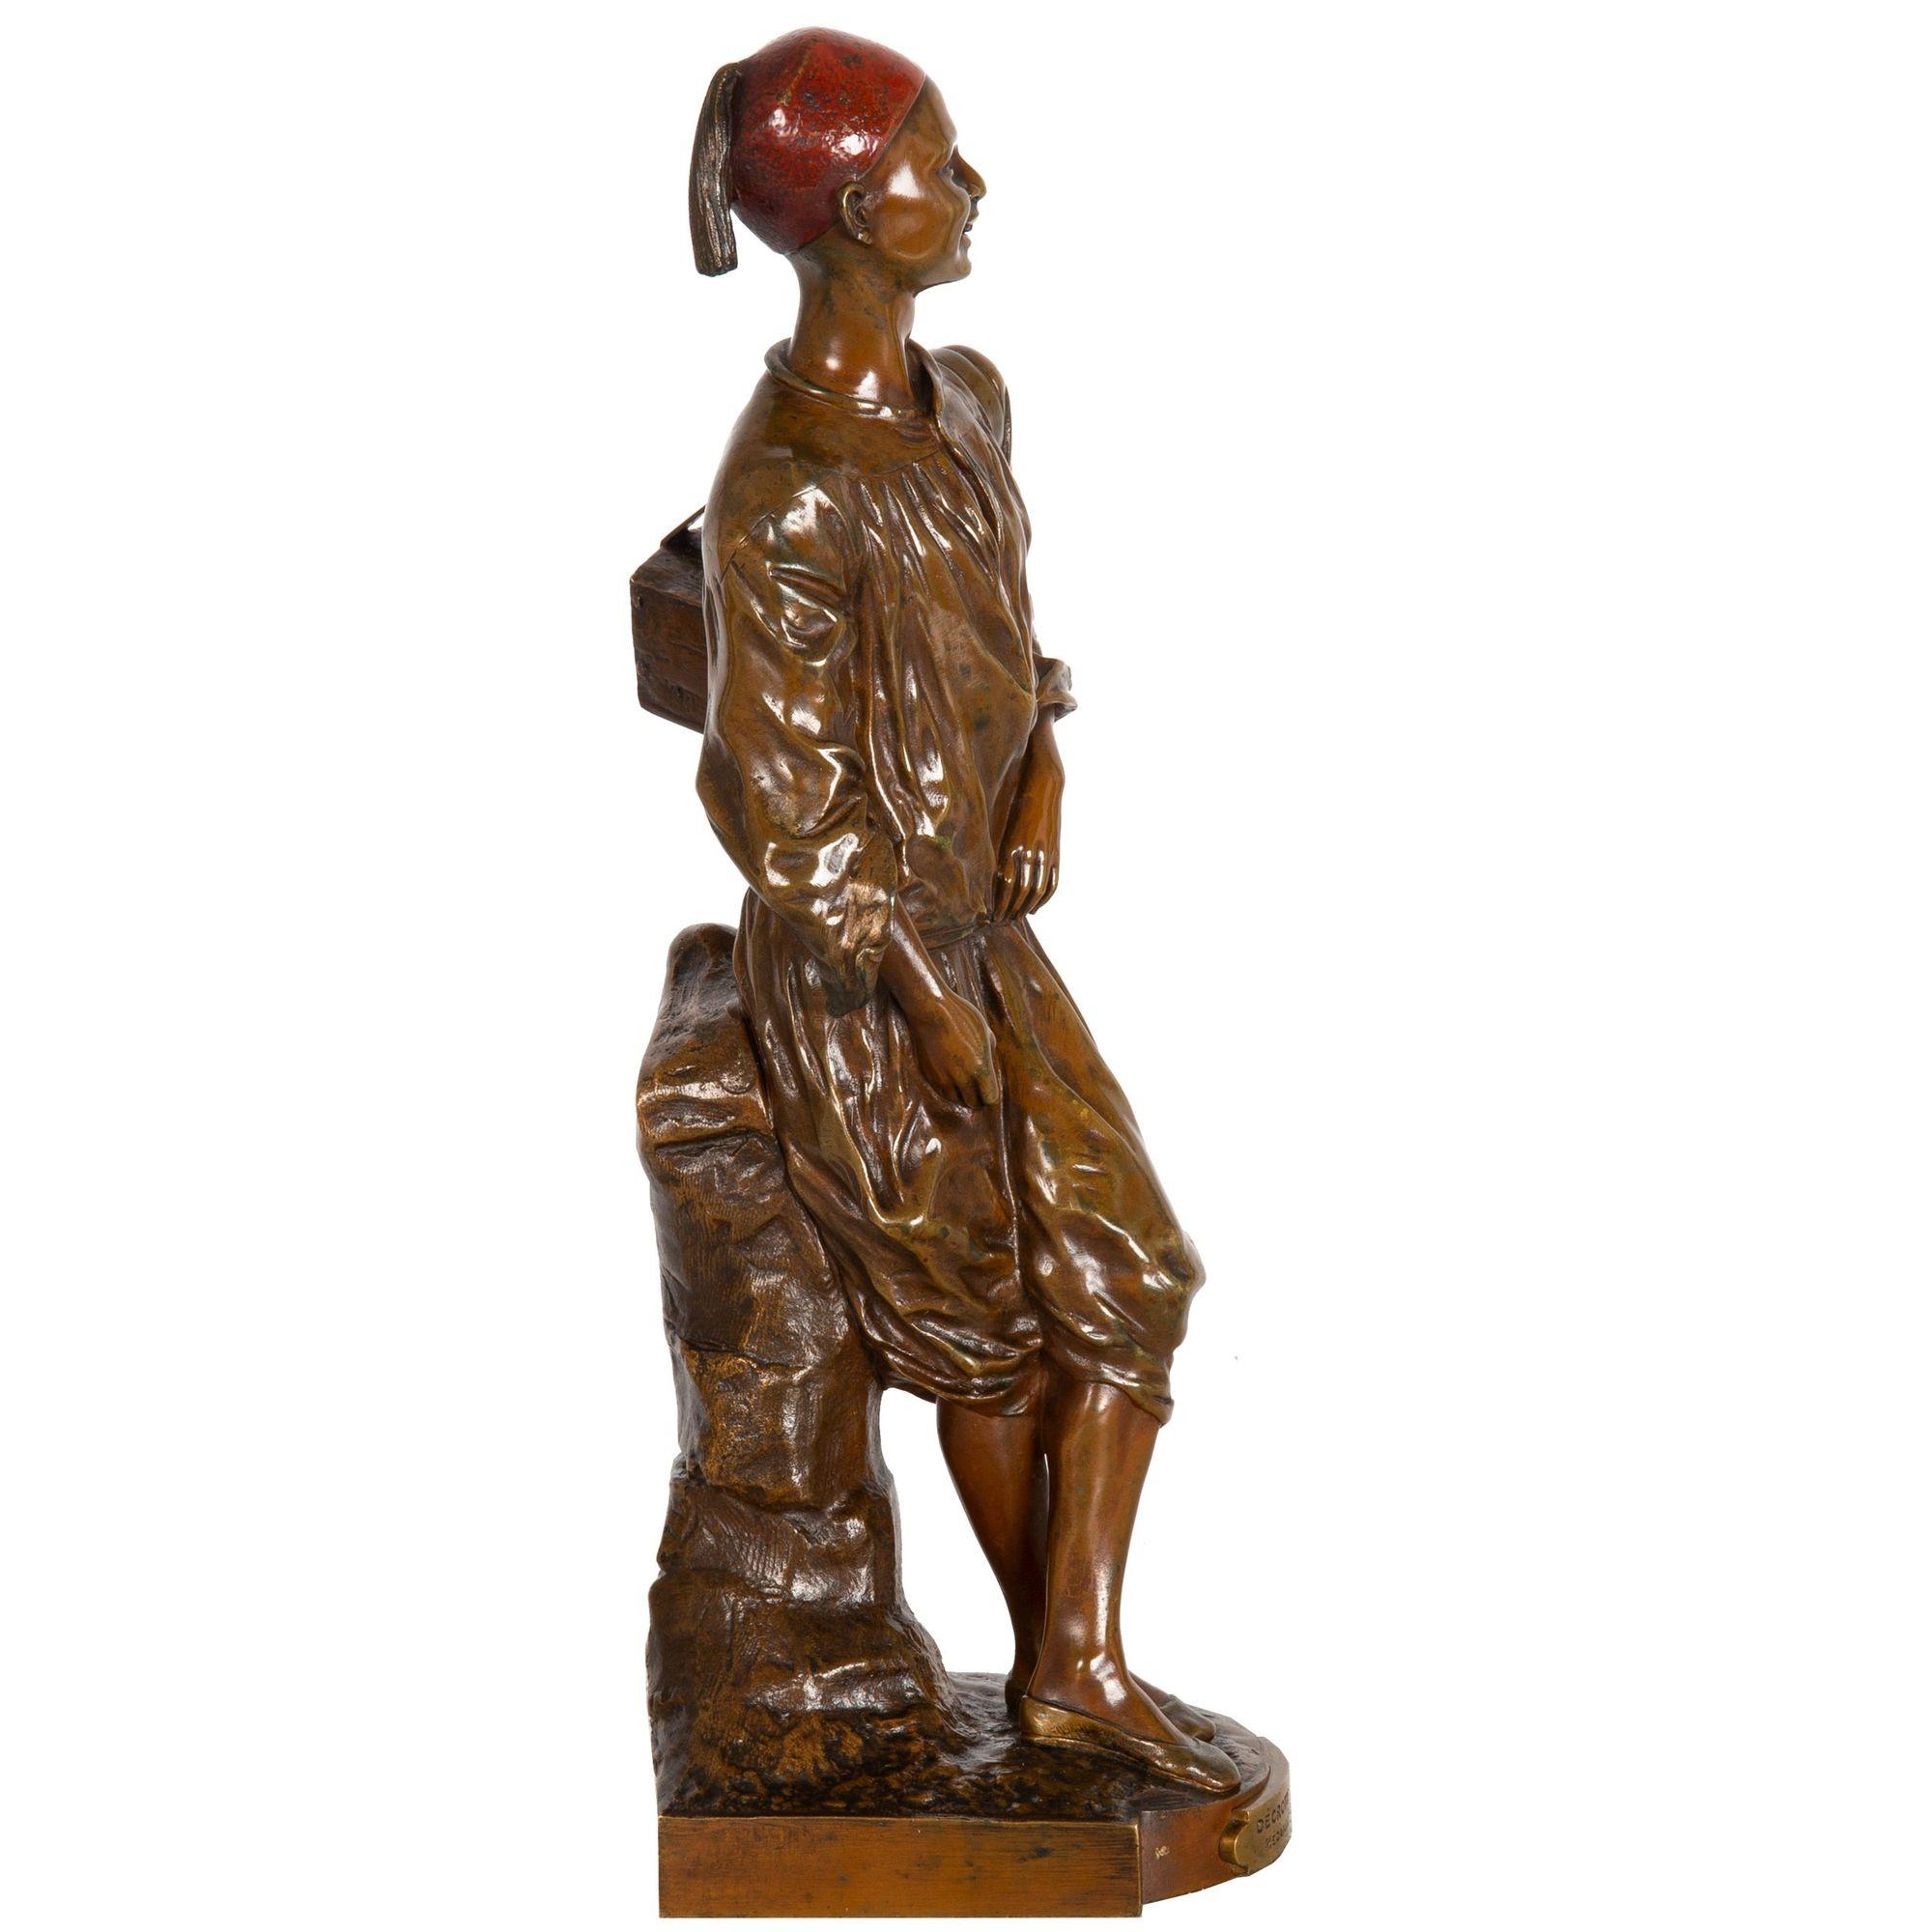 French Orientalist Bronze Sculpture “Arab Shoeshine” after Edouard Drouot In Good Condition For Sale In Shippensburg, PA